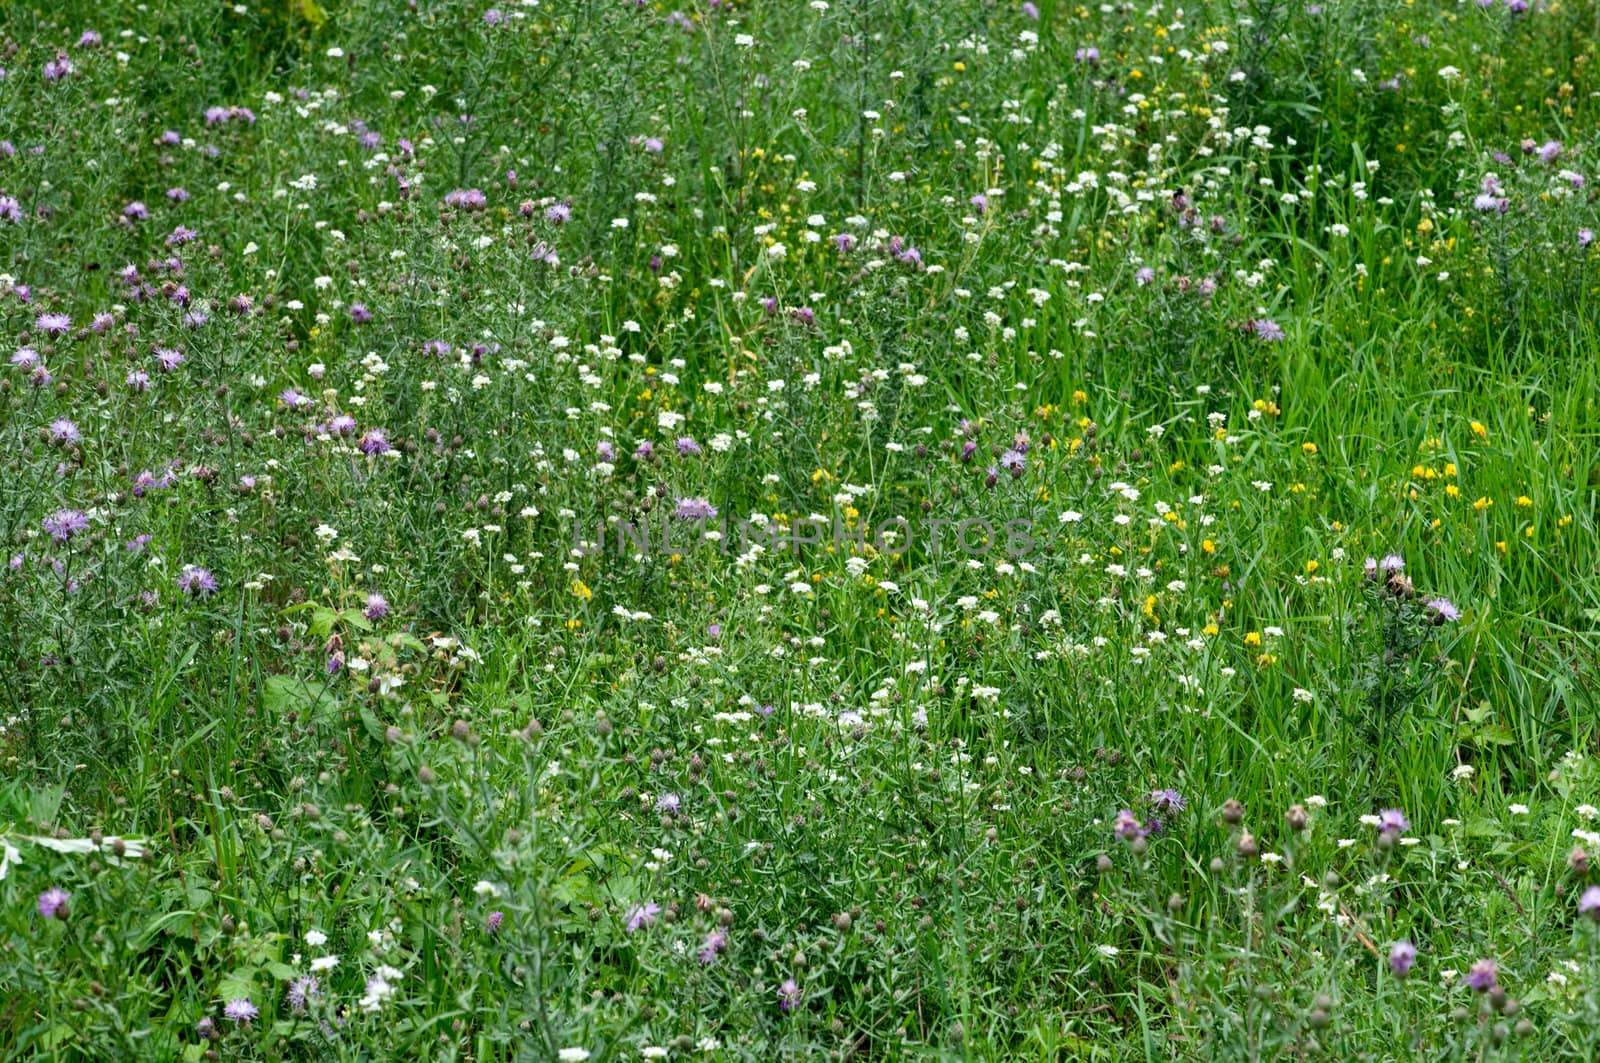 Close-up Image of Spring Meadow with Green Grass and Field Flowers